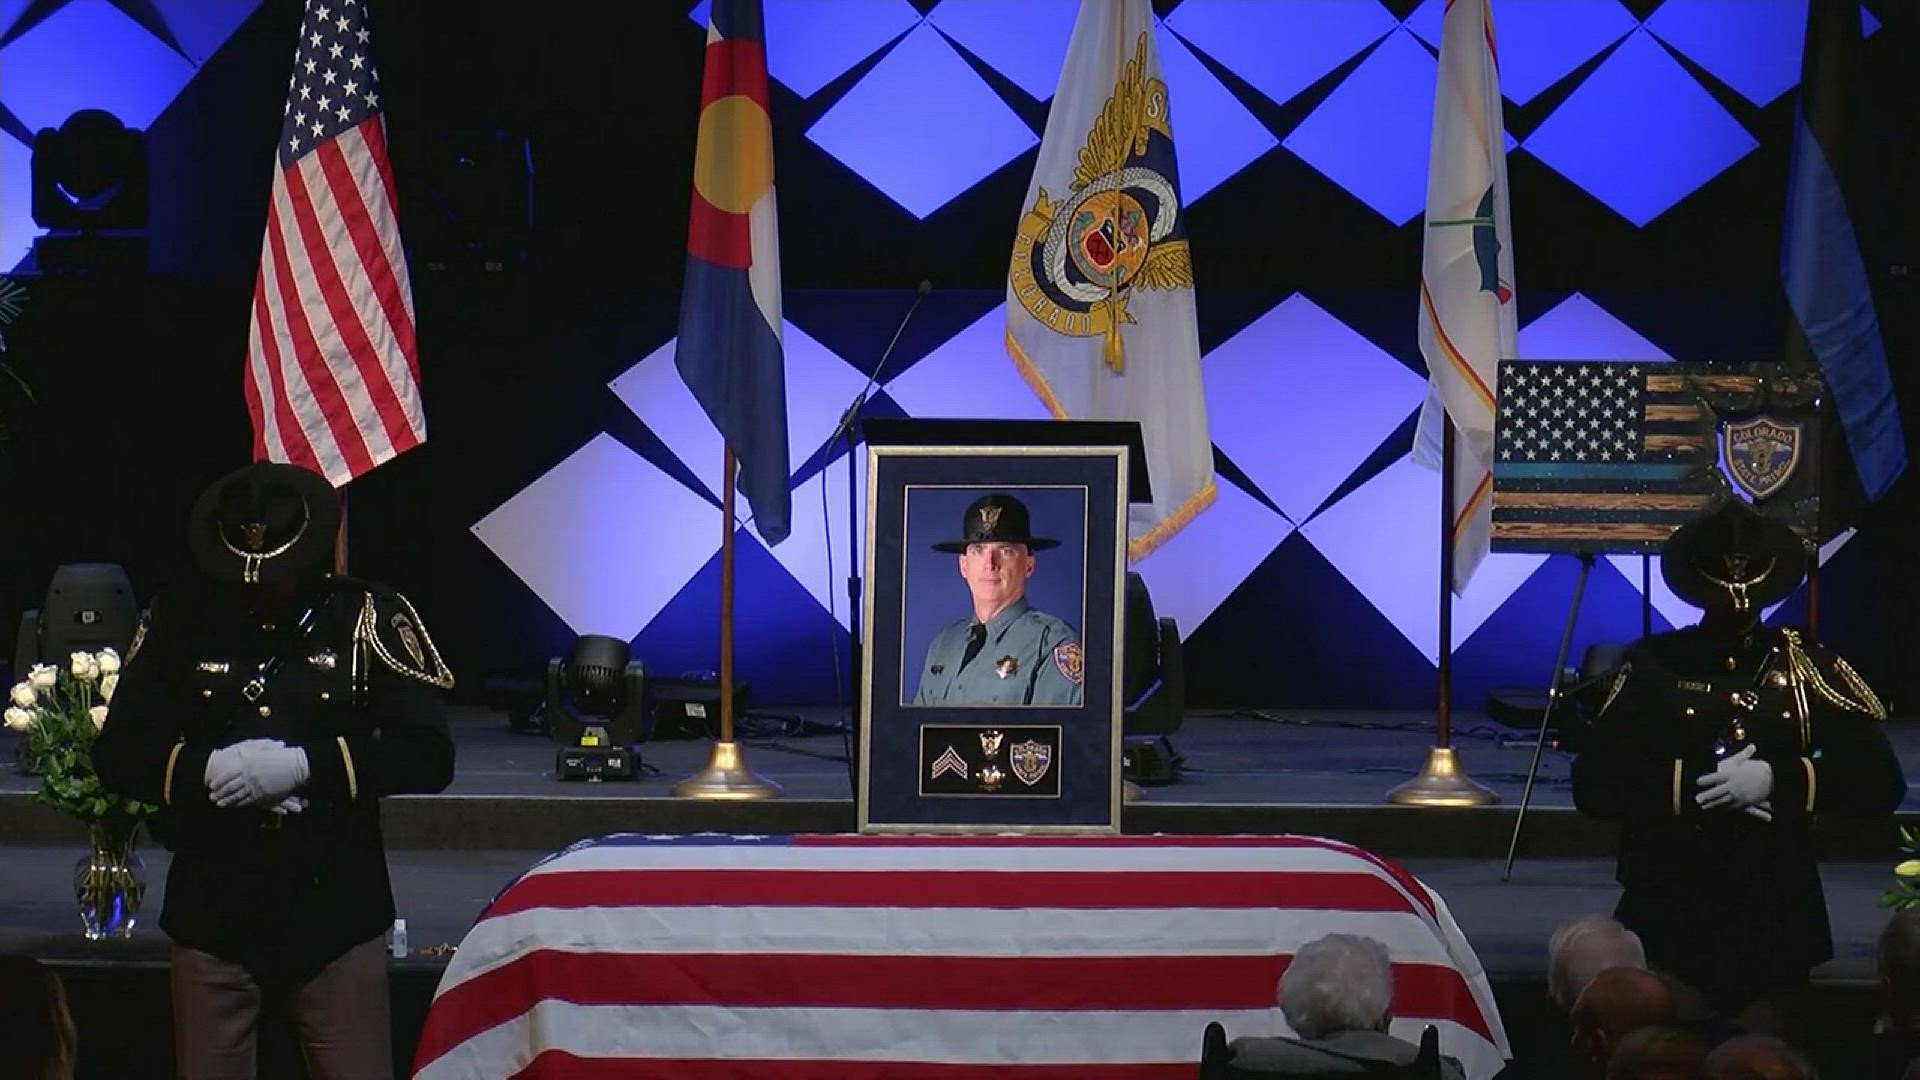 CSP Cpl. Dan Groves was killed while helping a stranded driver on a rural stretch of I-76 during last week's blizzard. He was laid to rest Thursday morning.